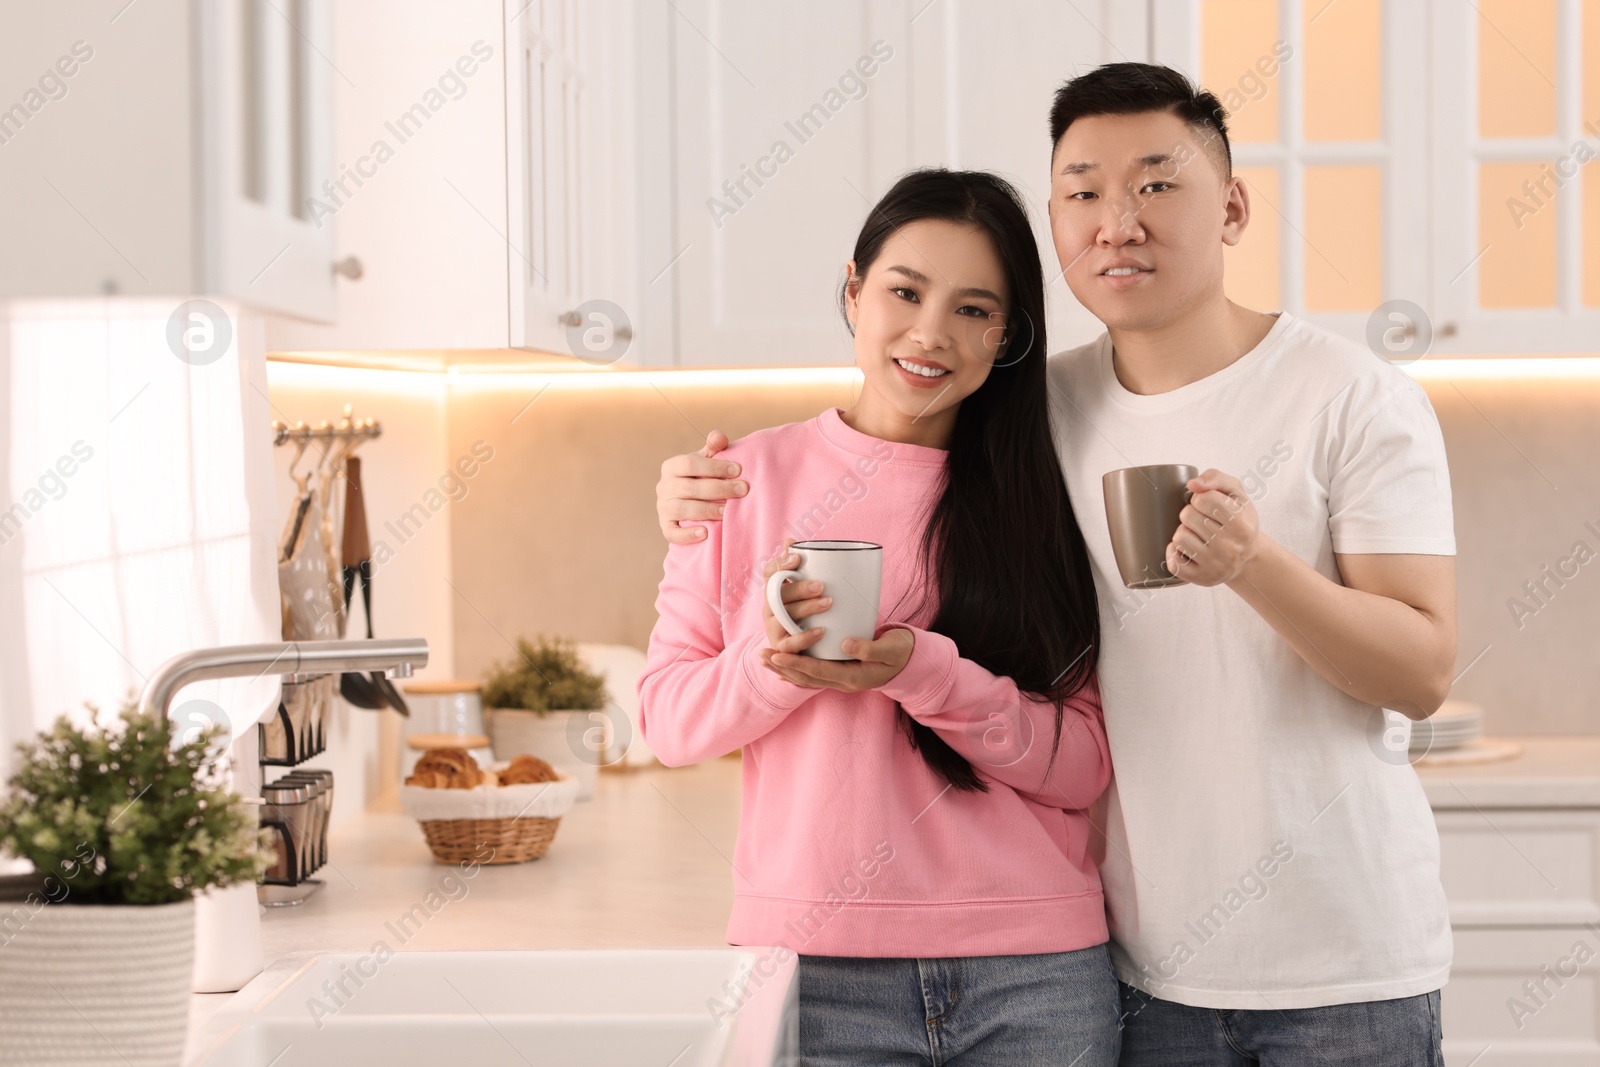 Photo of Lovely couple with cups of drink enjoying time together in kitchen